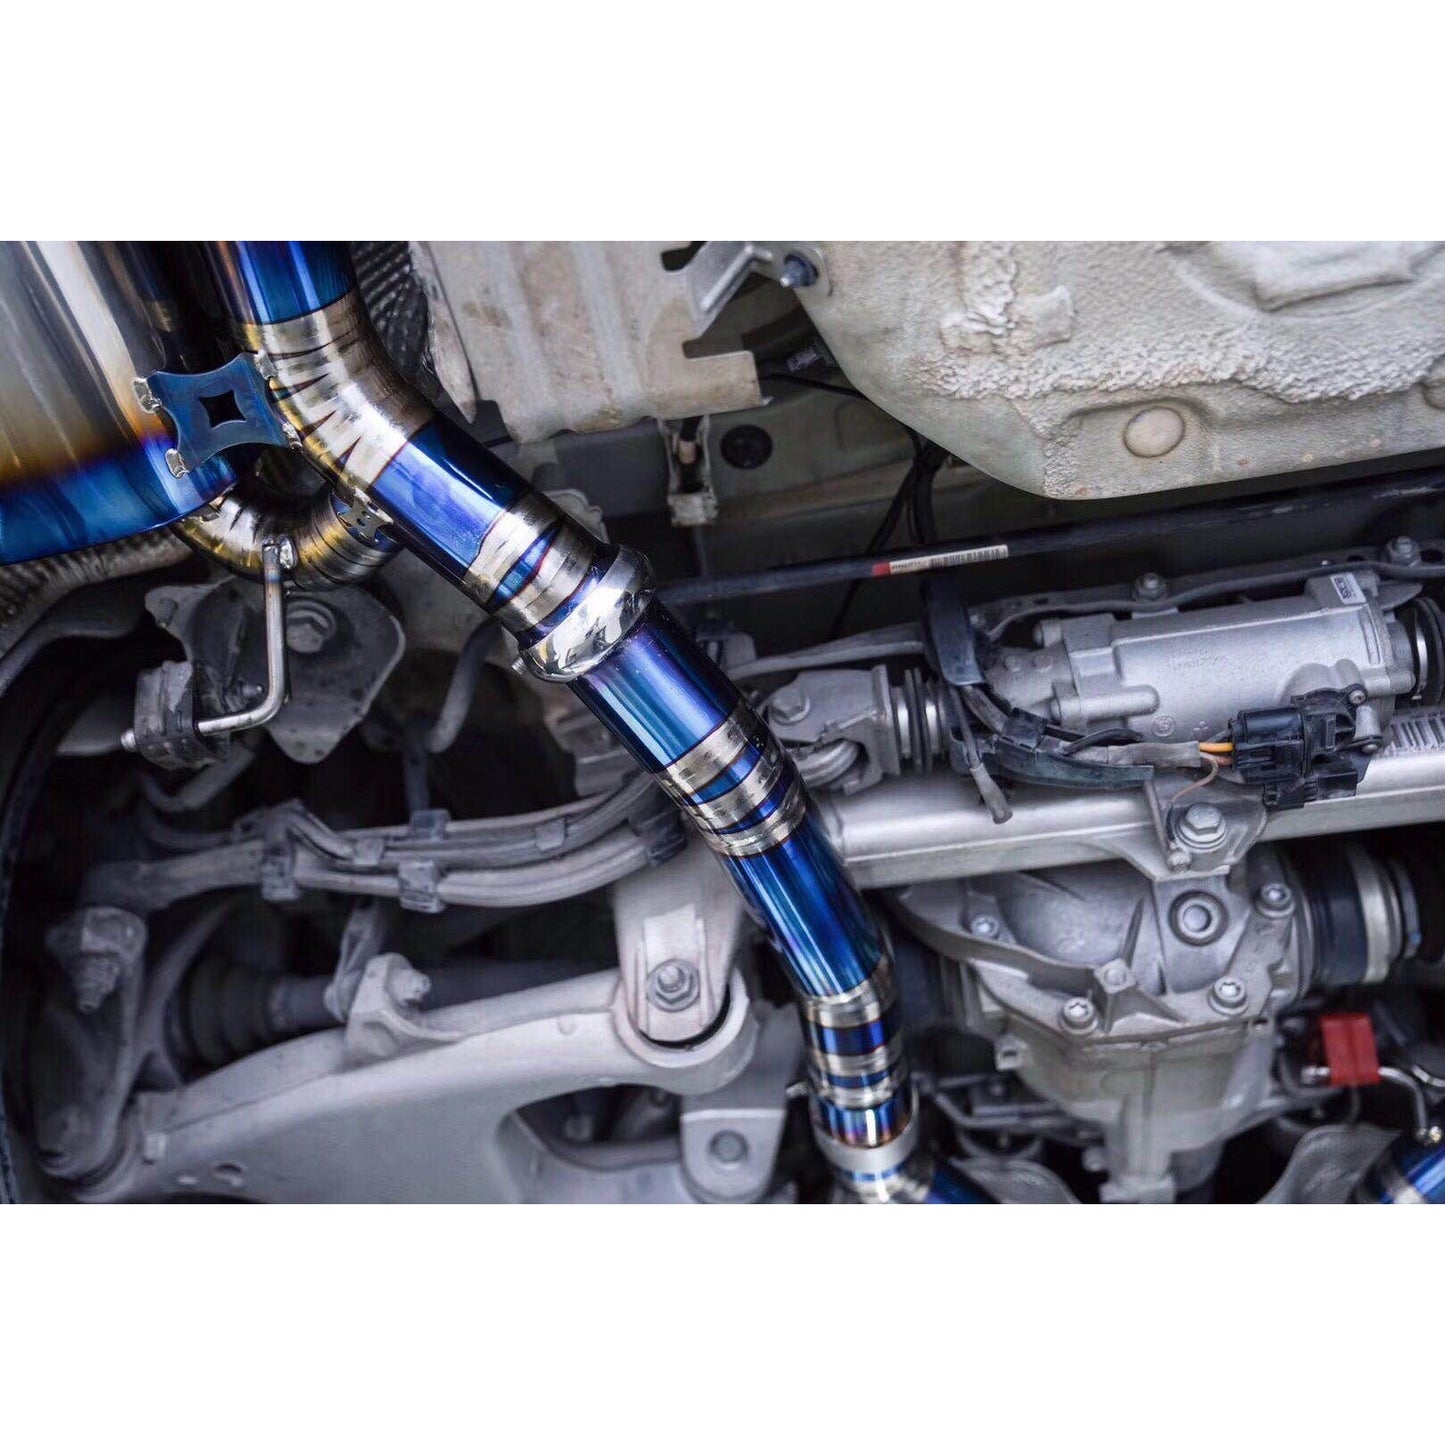 RES Valvetronic Catback Exhaust - 2015+WRX/STI-Cat Back Exhaust System-RES-JDMuscle